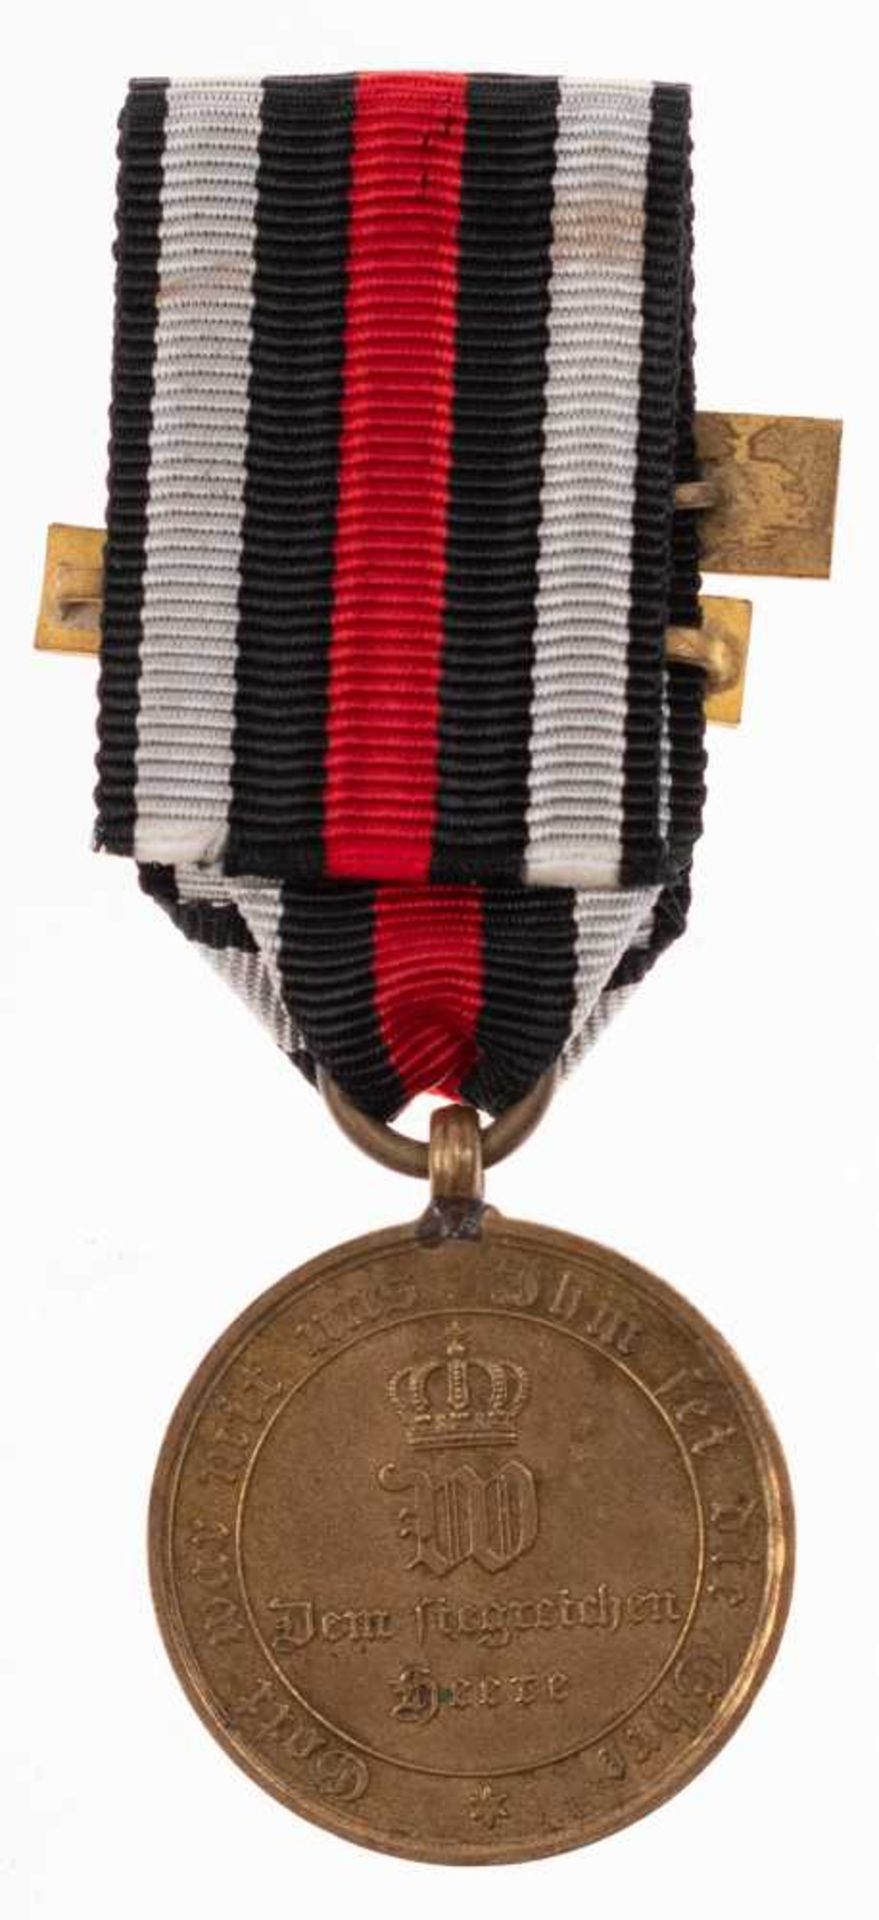 Prussia, war medal 1870 / 71 for fighter, OEK 1941 / 1, at the volume, in addition to it combat ribb - Image 2 of 2